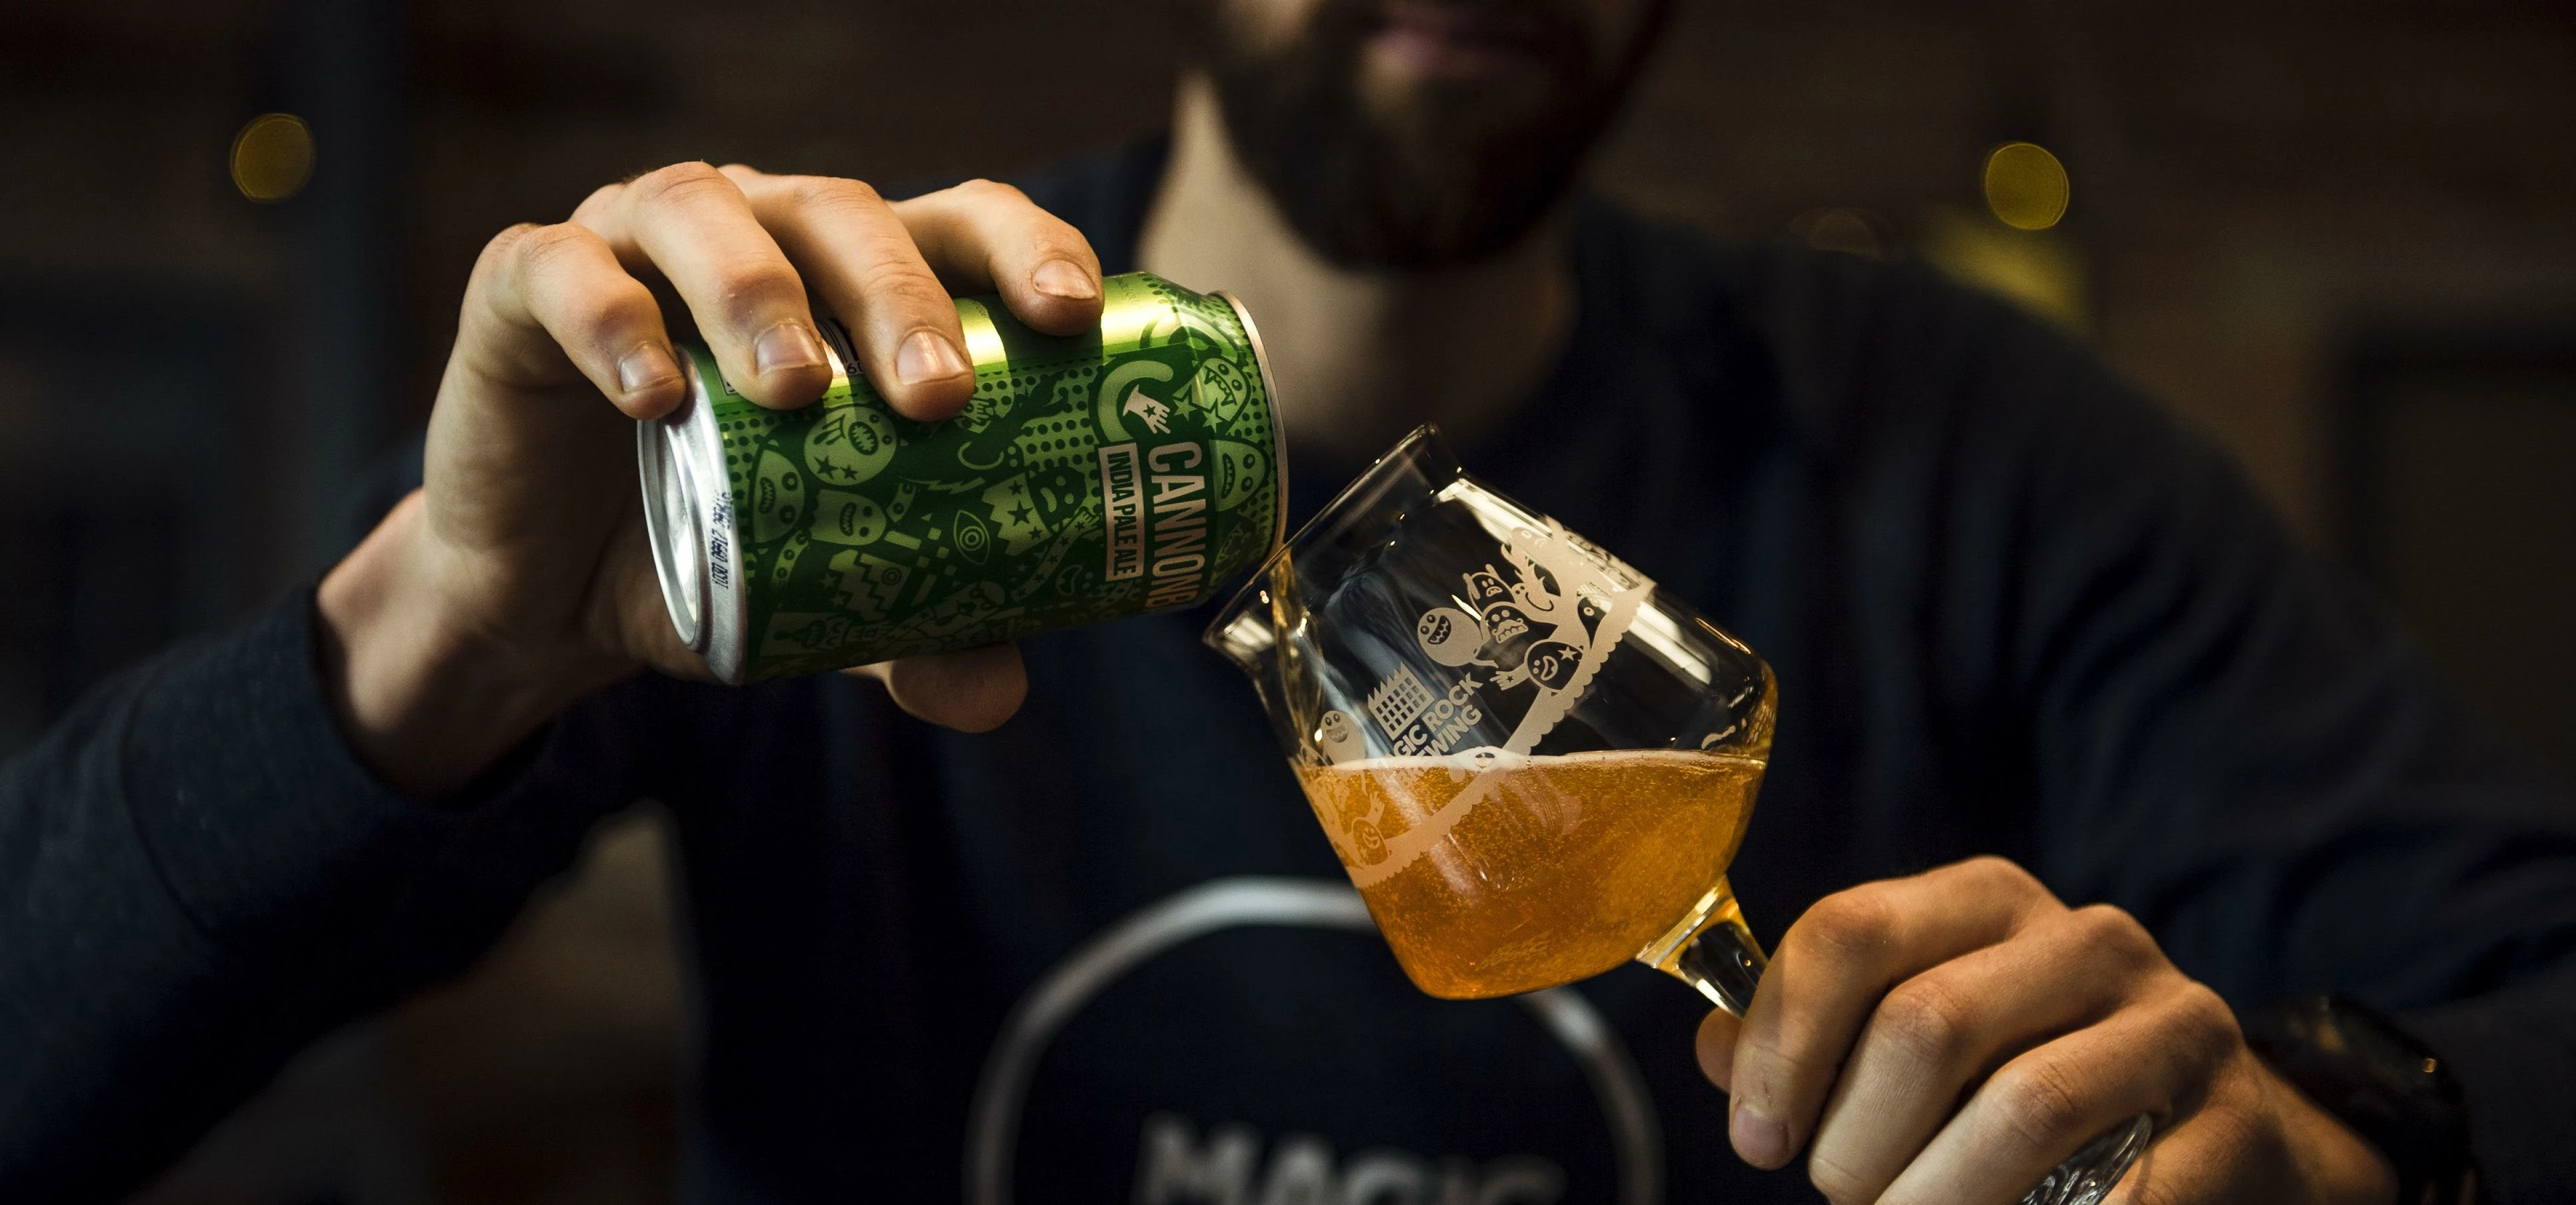 Magic Rock Brewing Company aiming to increase turnover by 80%.